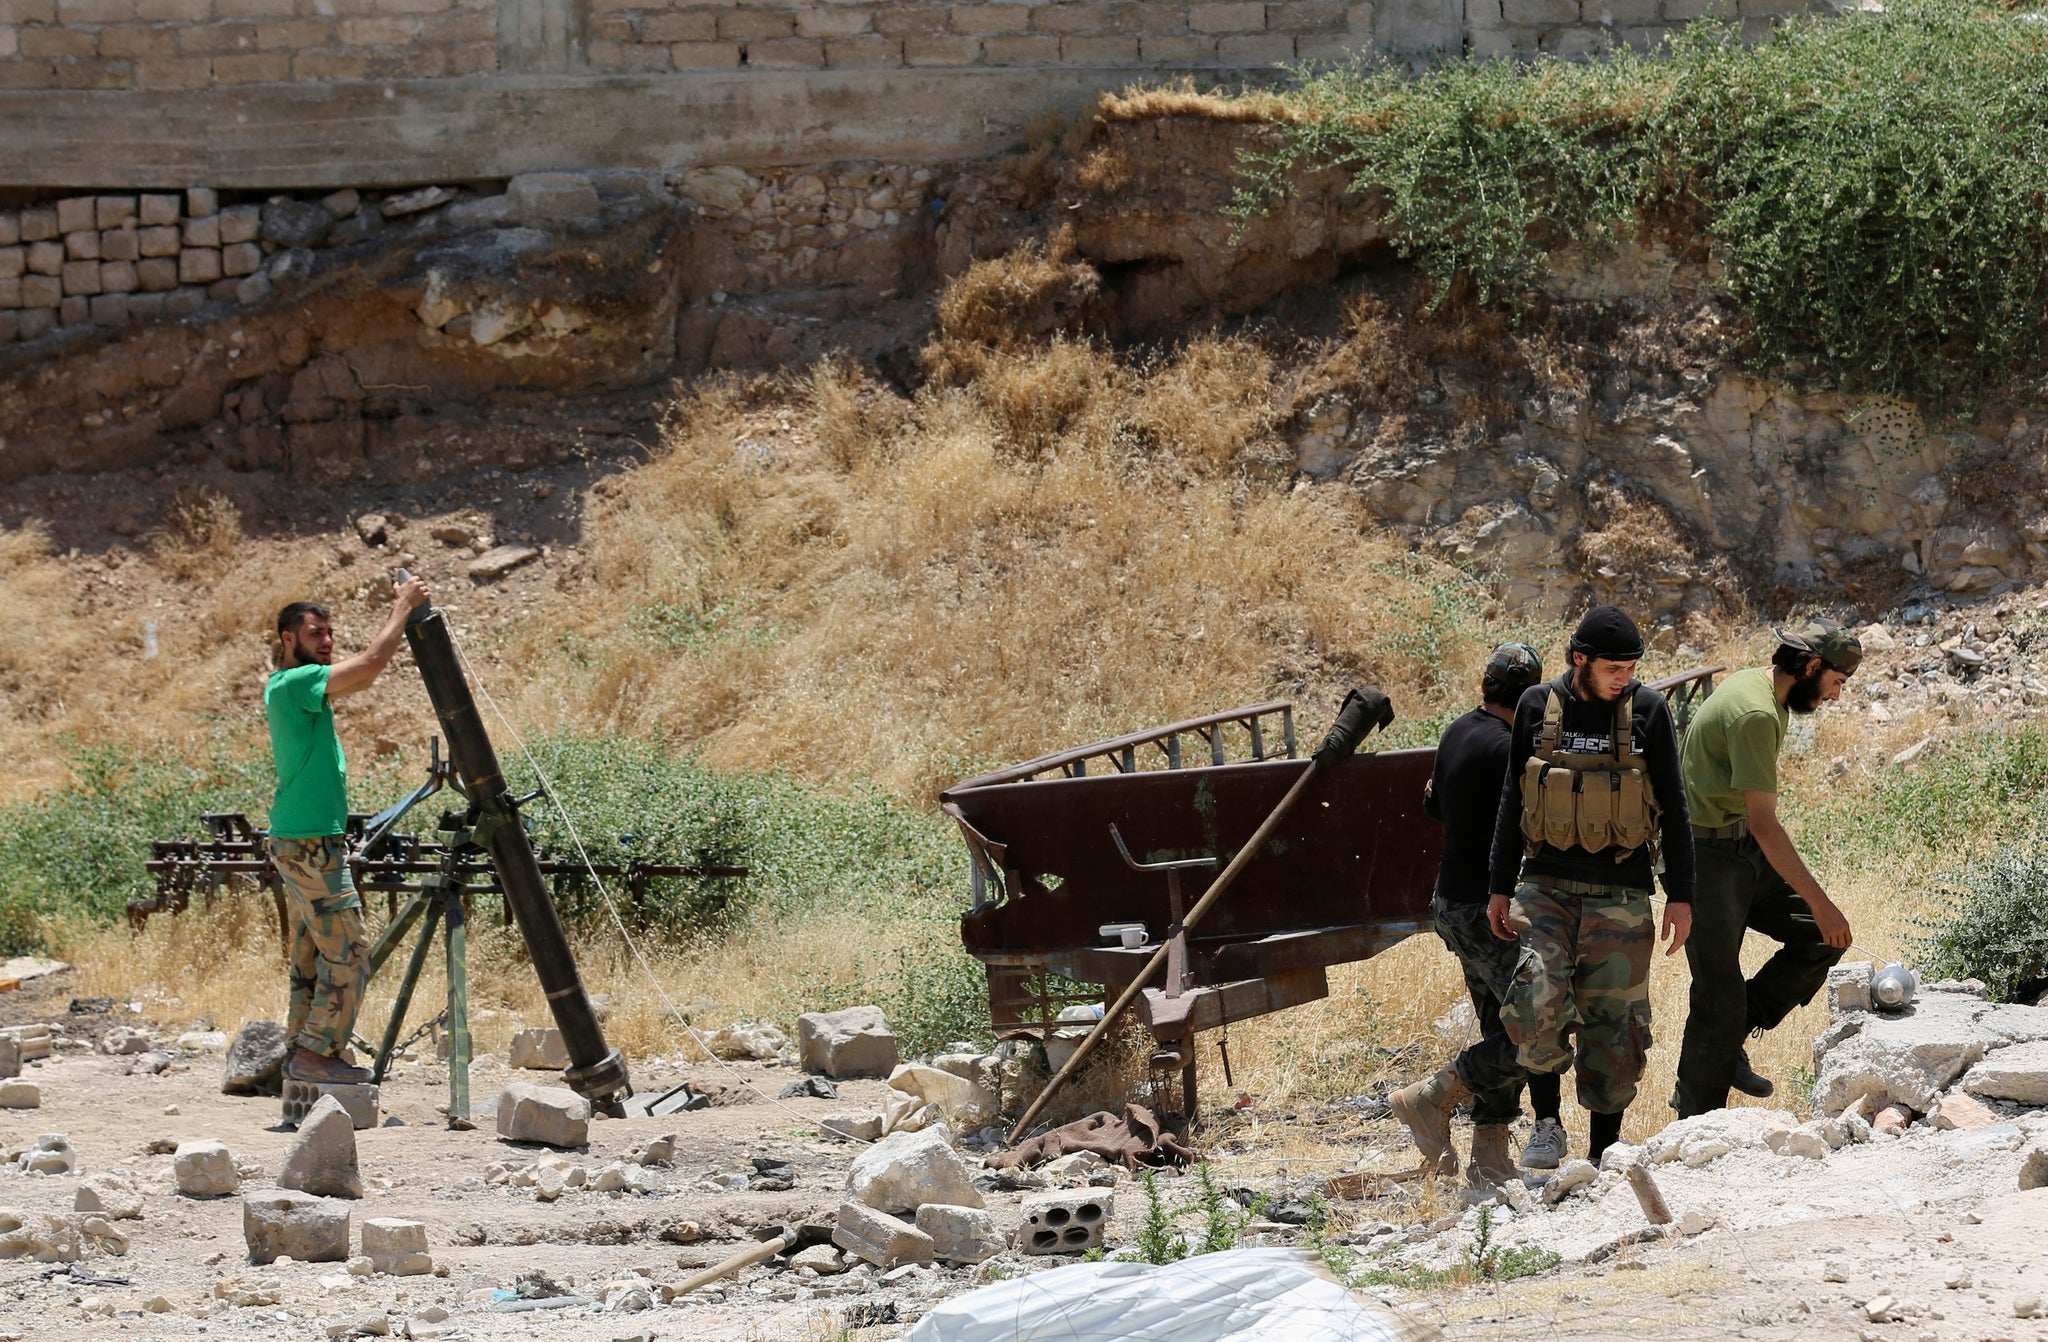 Syrian rebel fighters prepare to launch improvised mortars